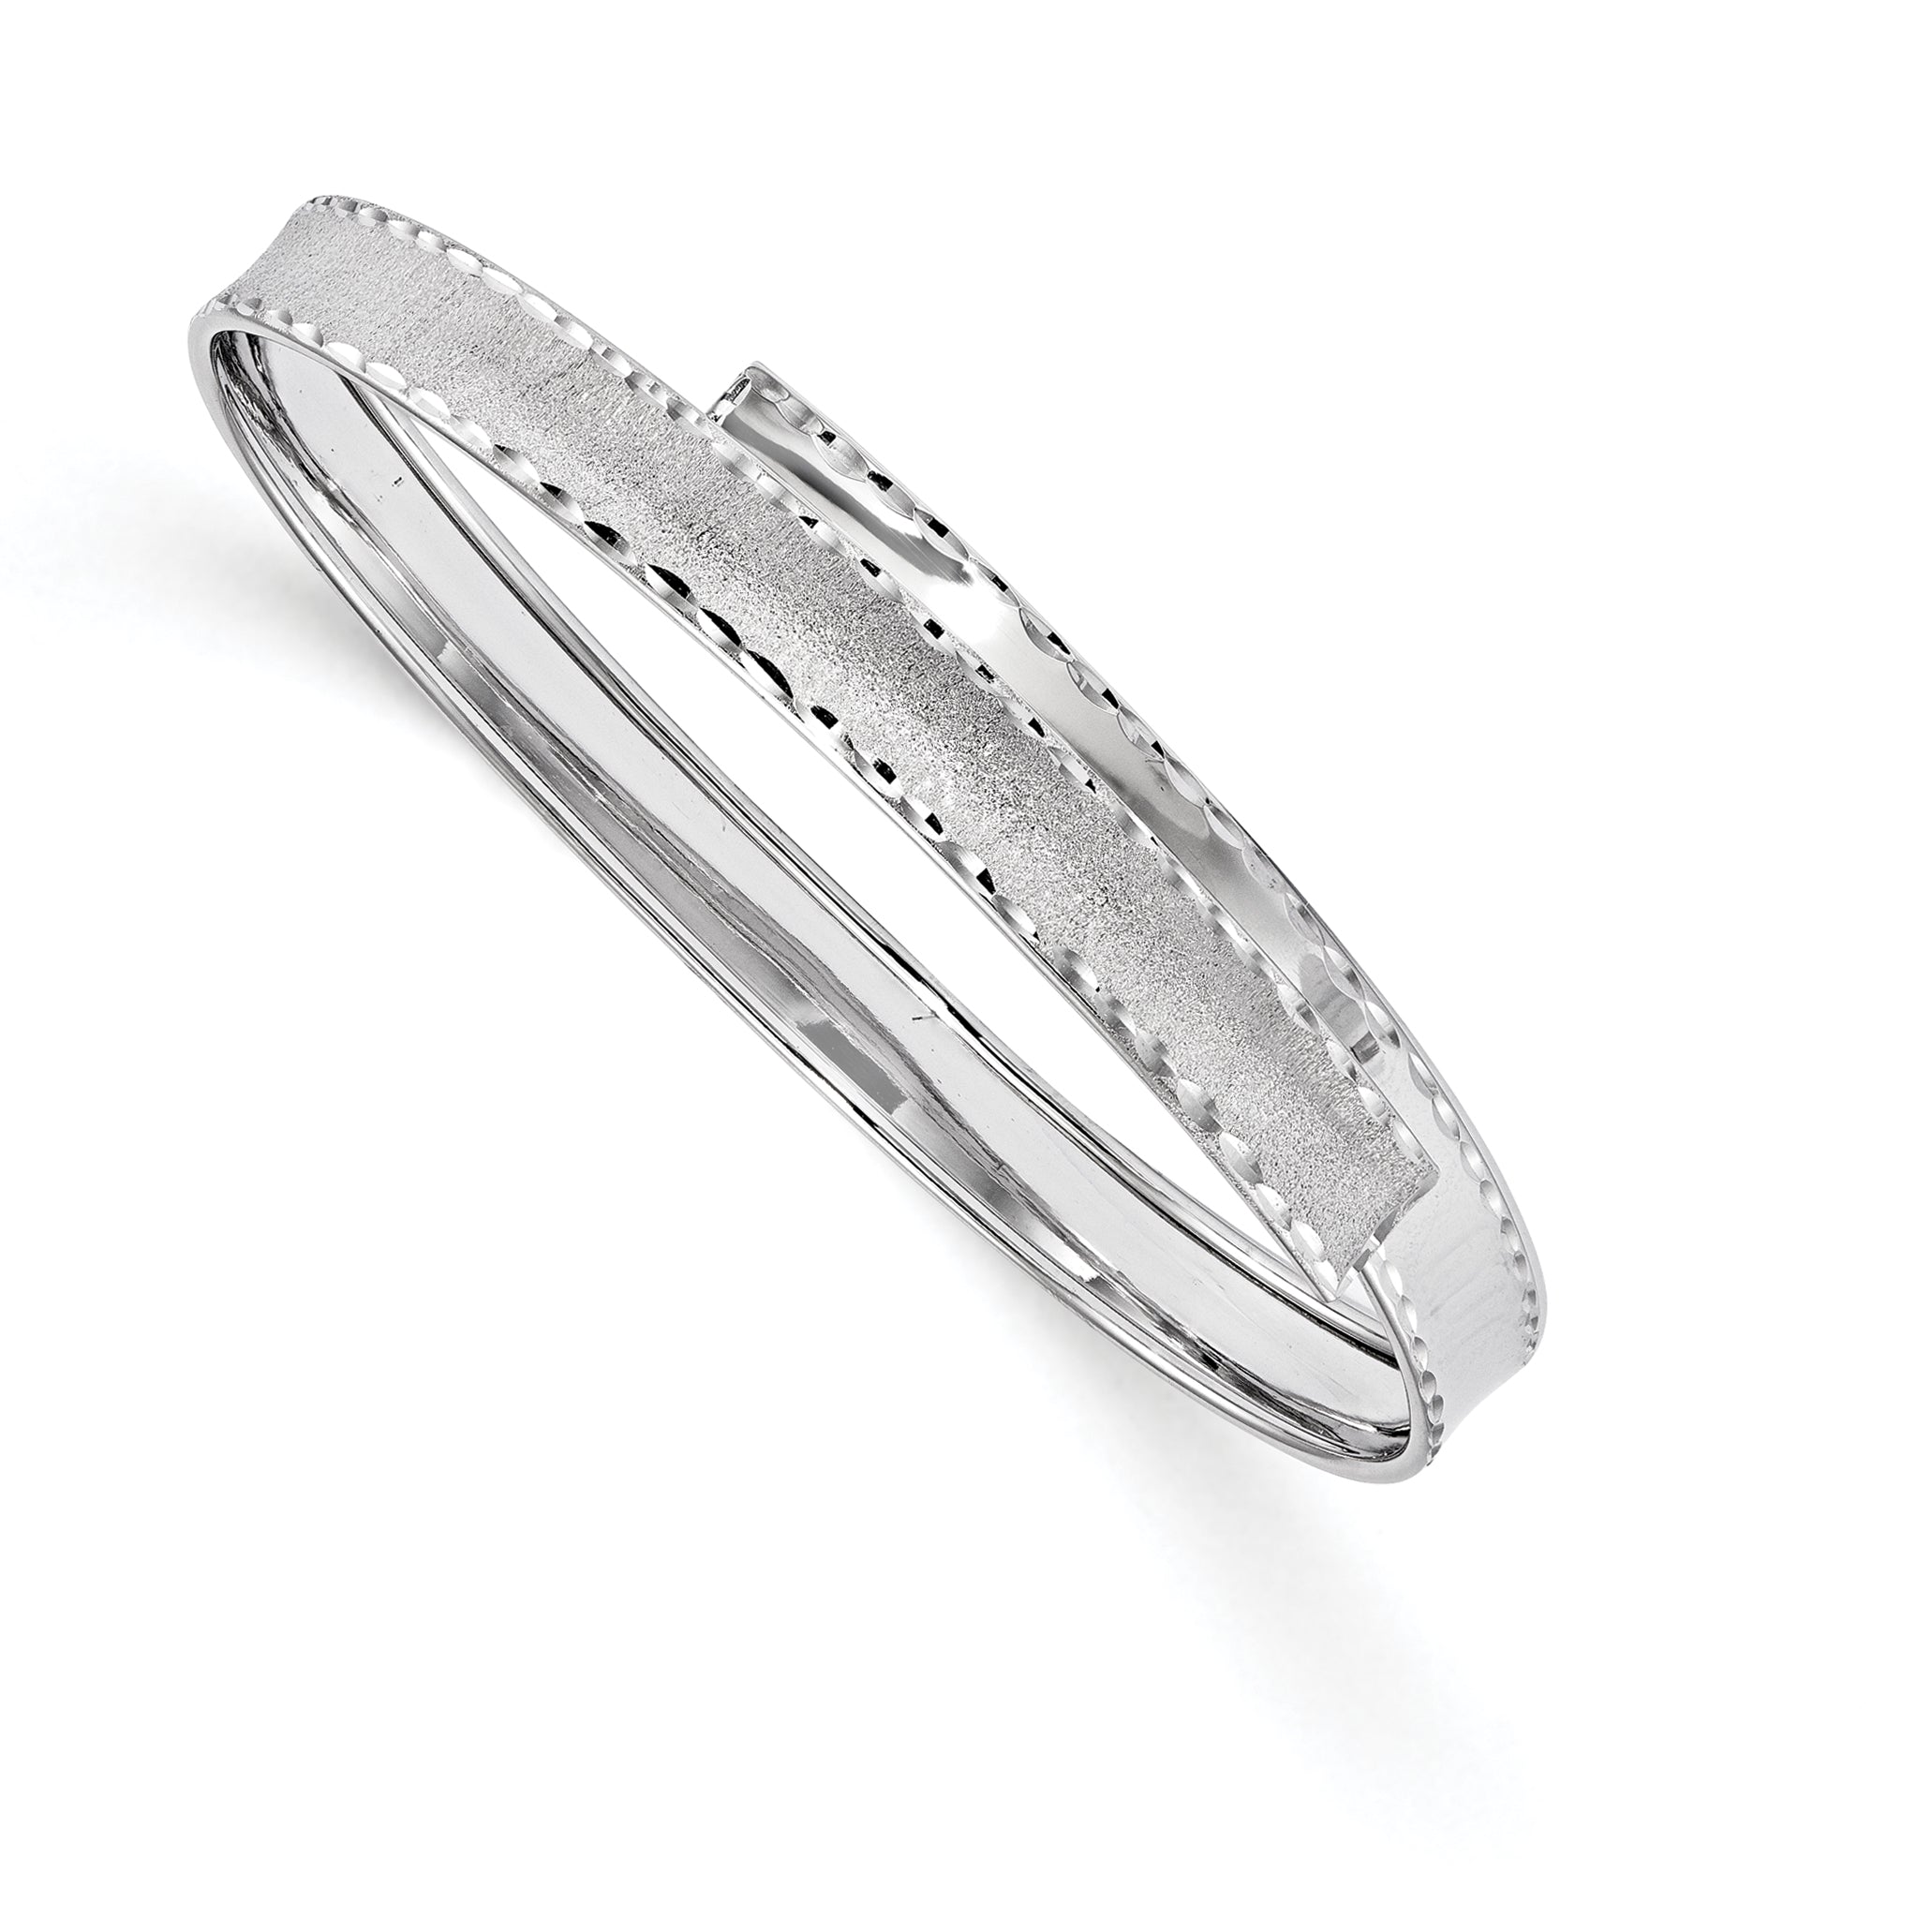 Leslie's 14K White Gold Polished and Textured Bangle